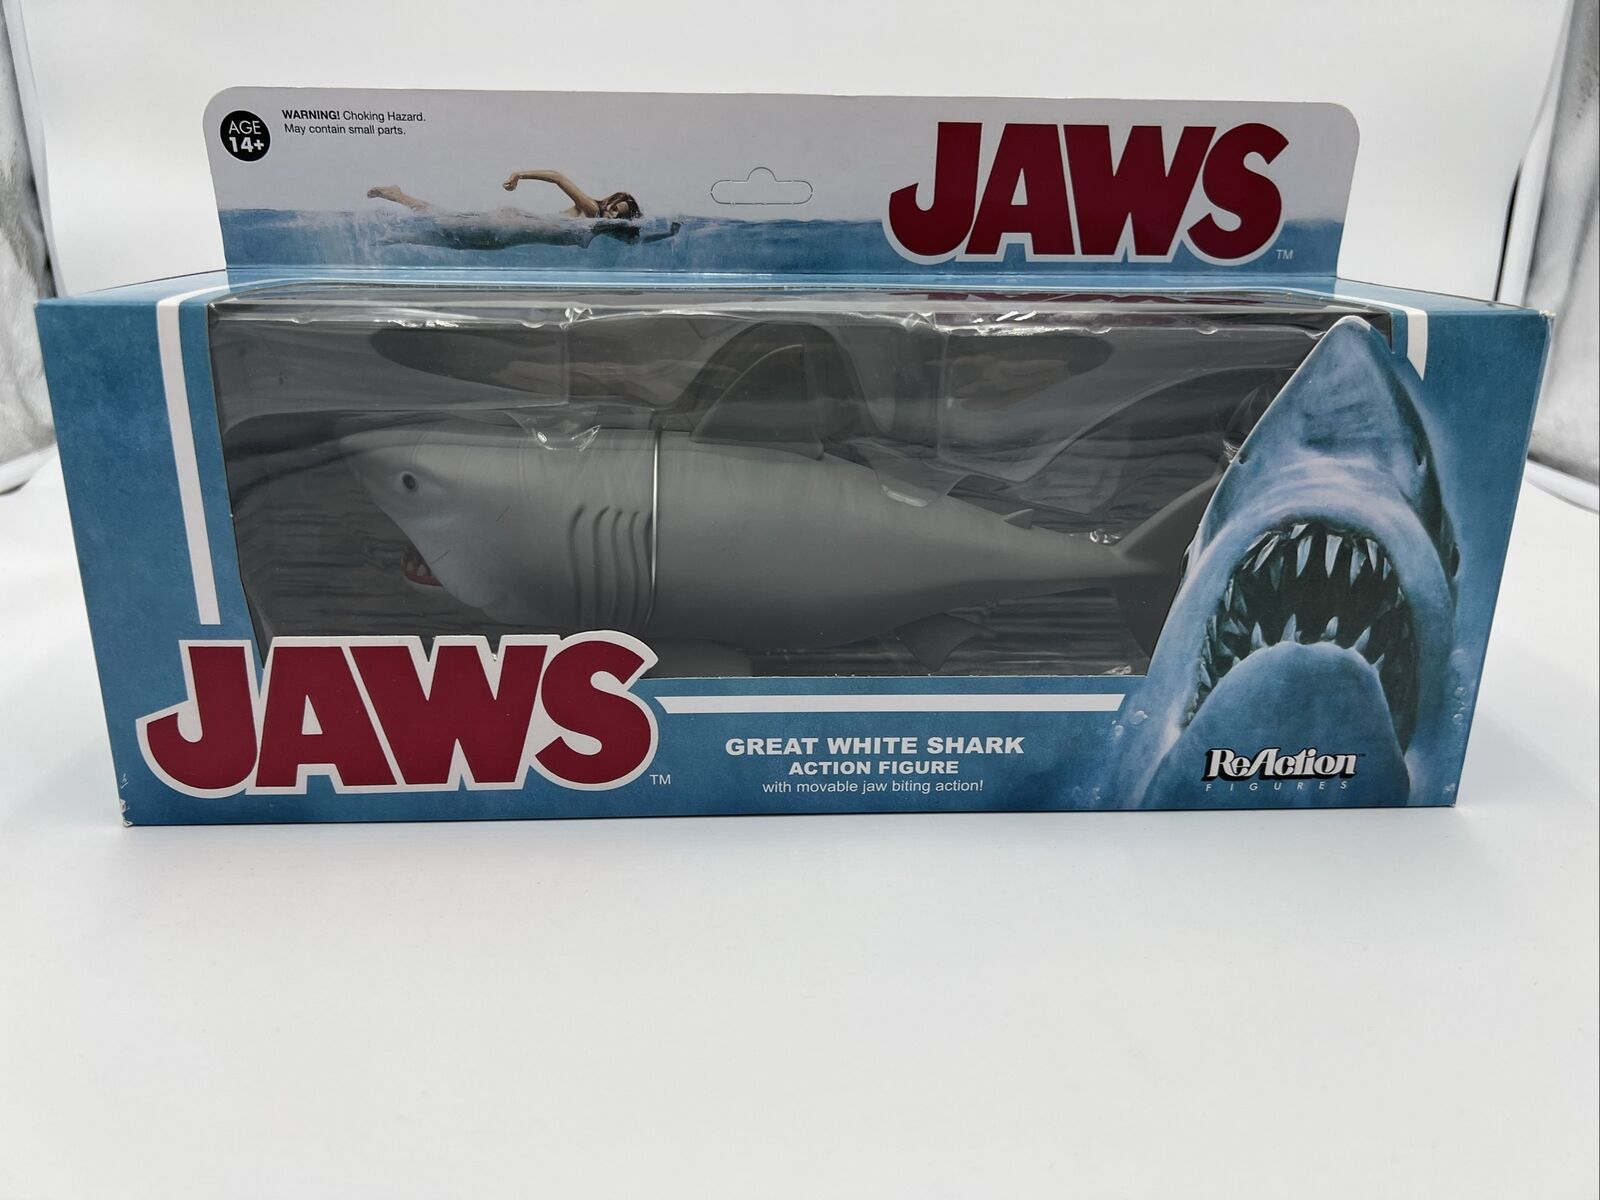 Reaction Jaws Great White Shark Moc